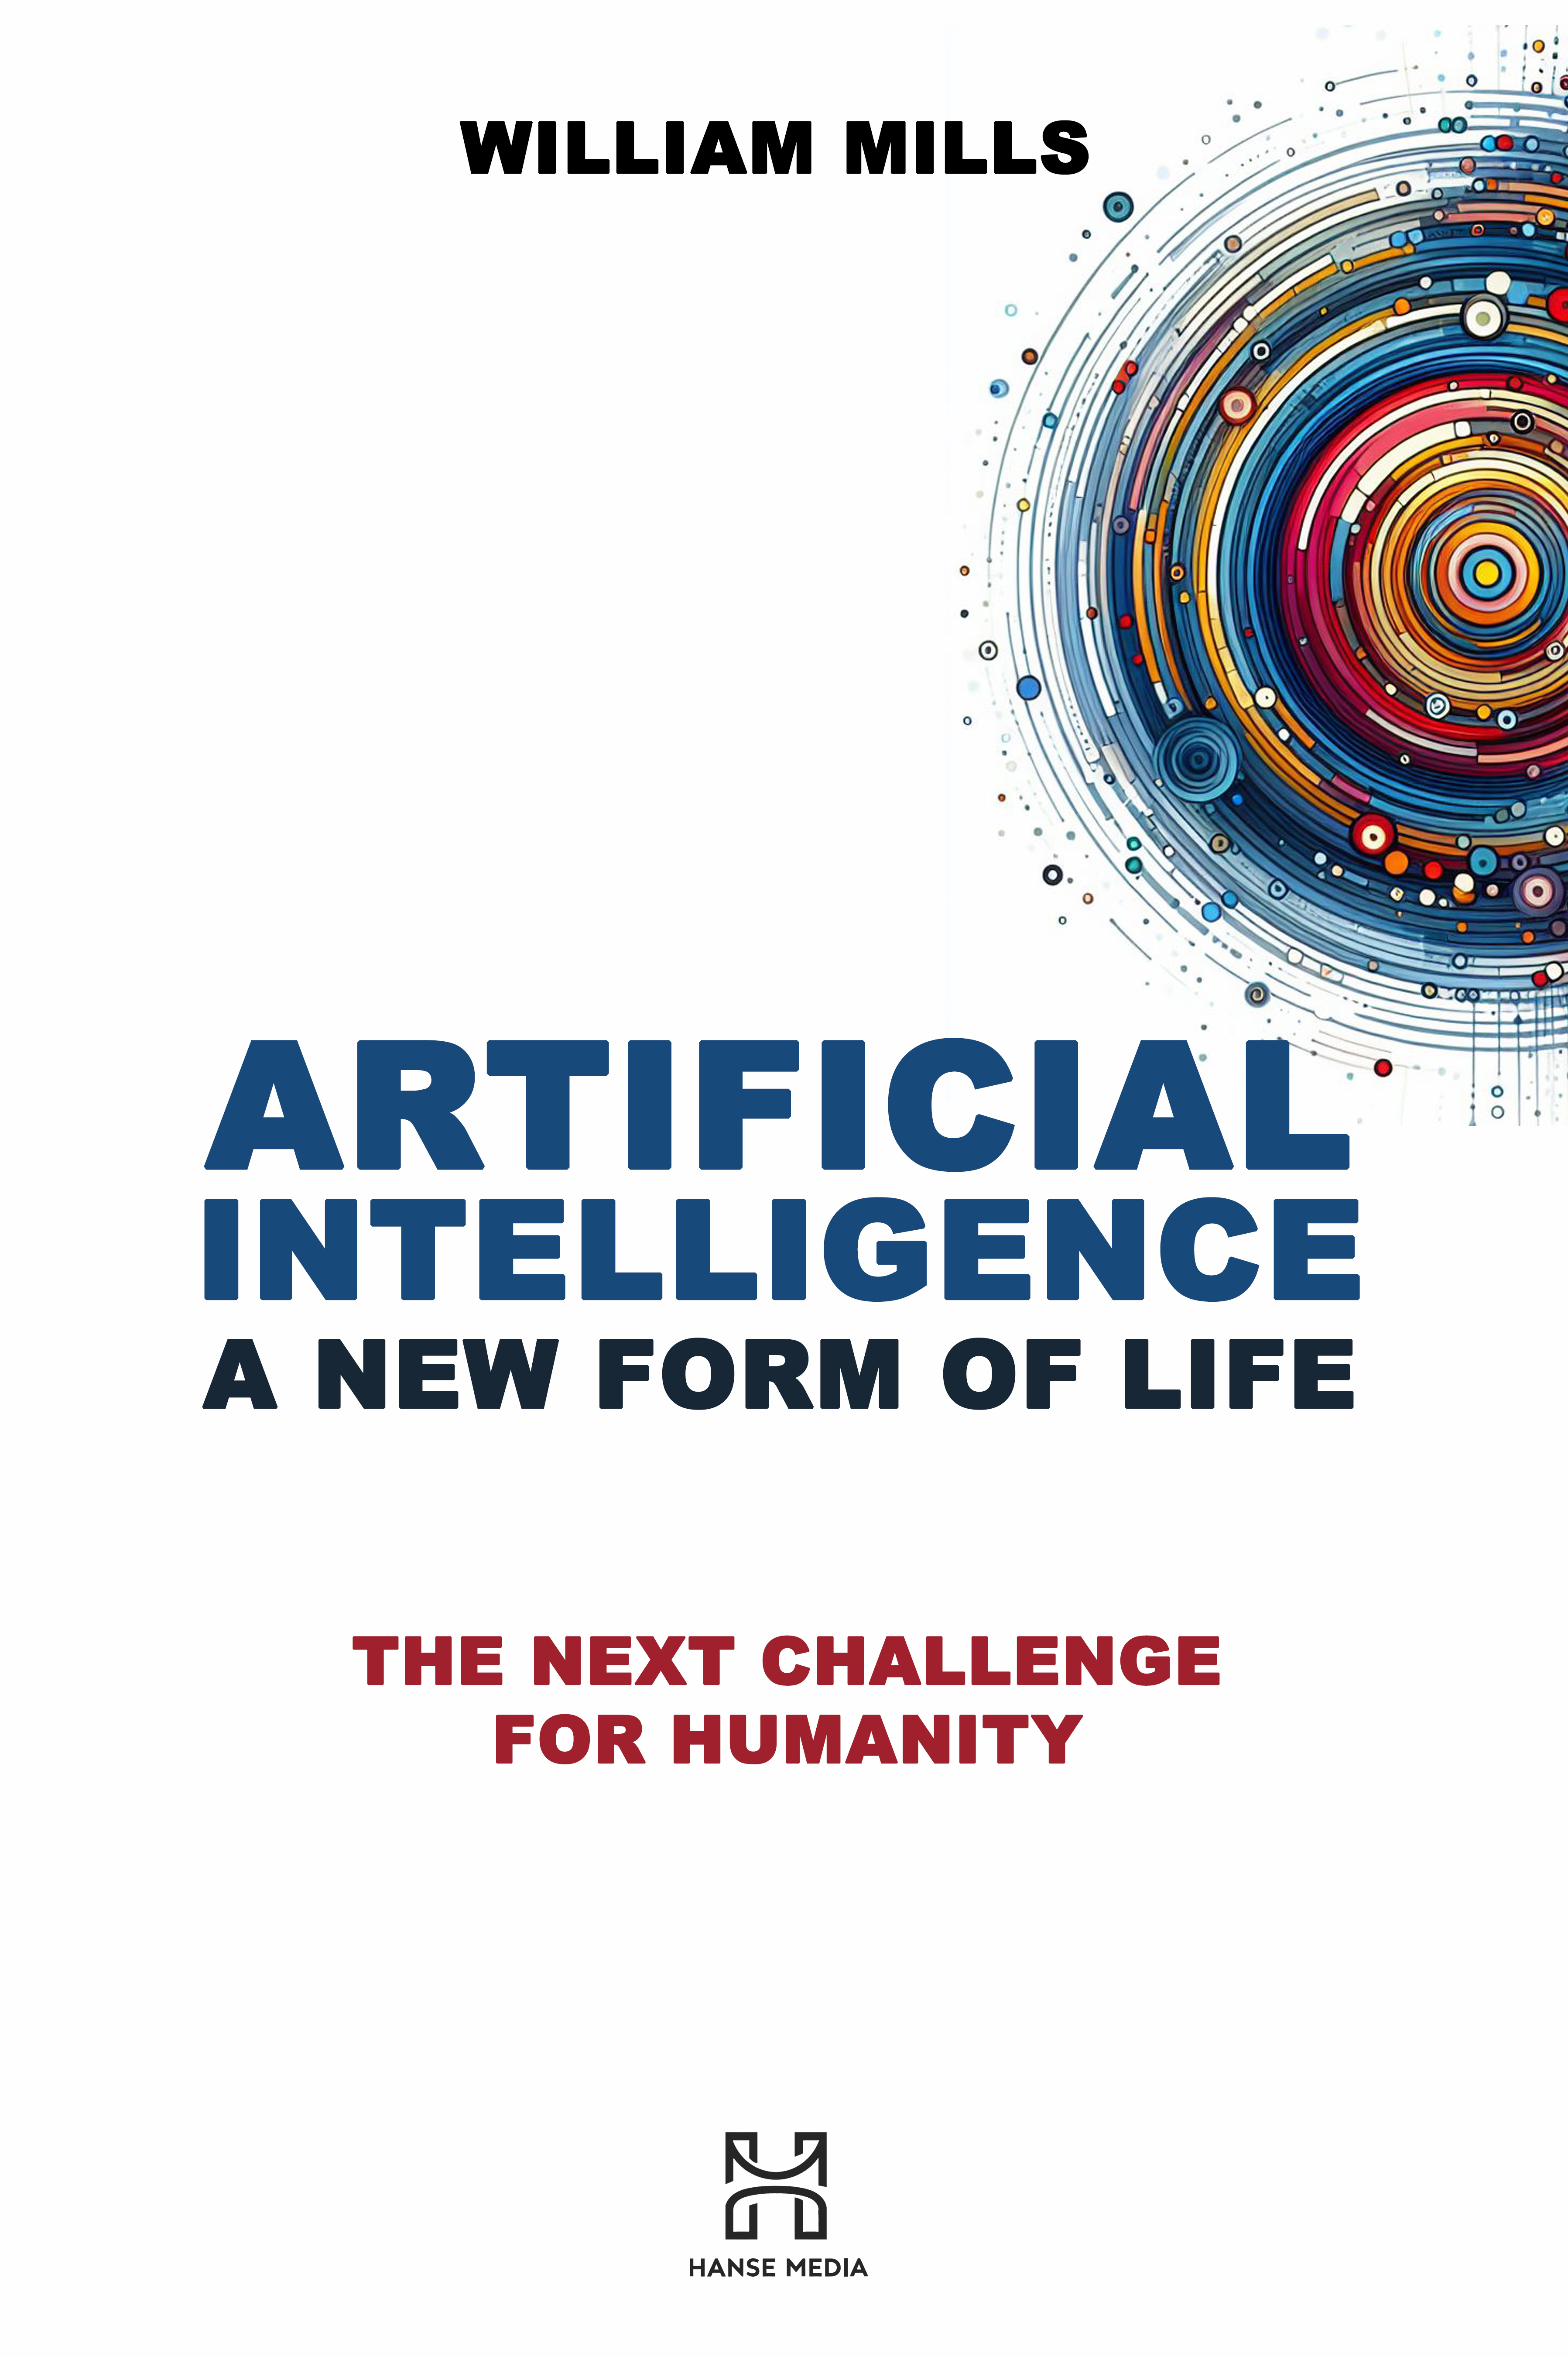 Artificial intelligence is a new form of life, is the suggestive theory of William Mills' new book